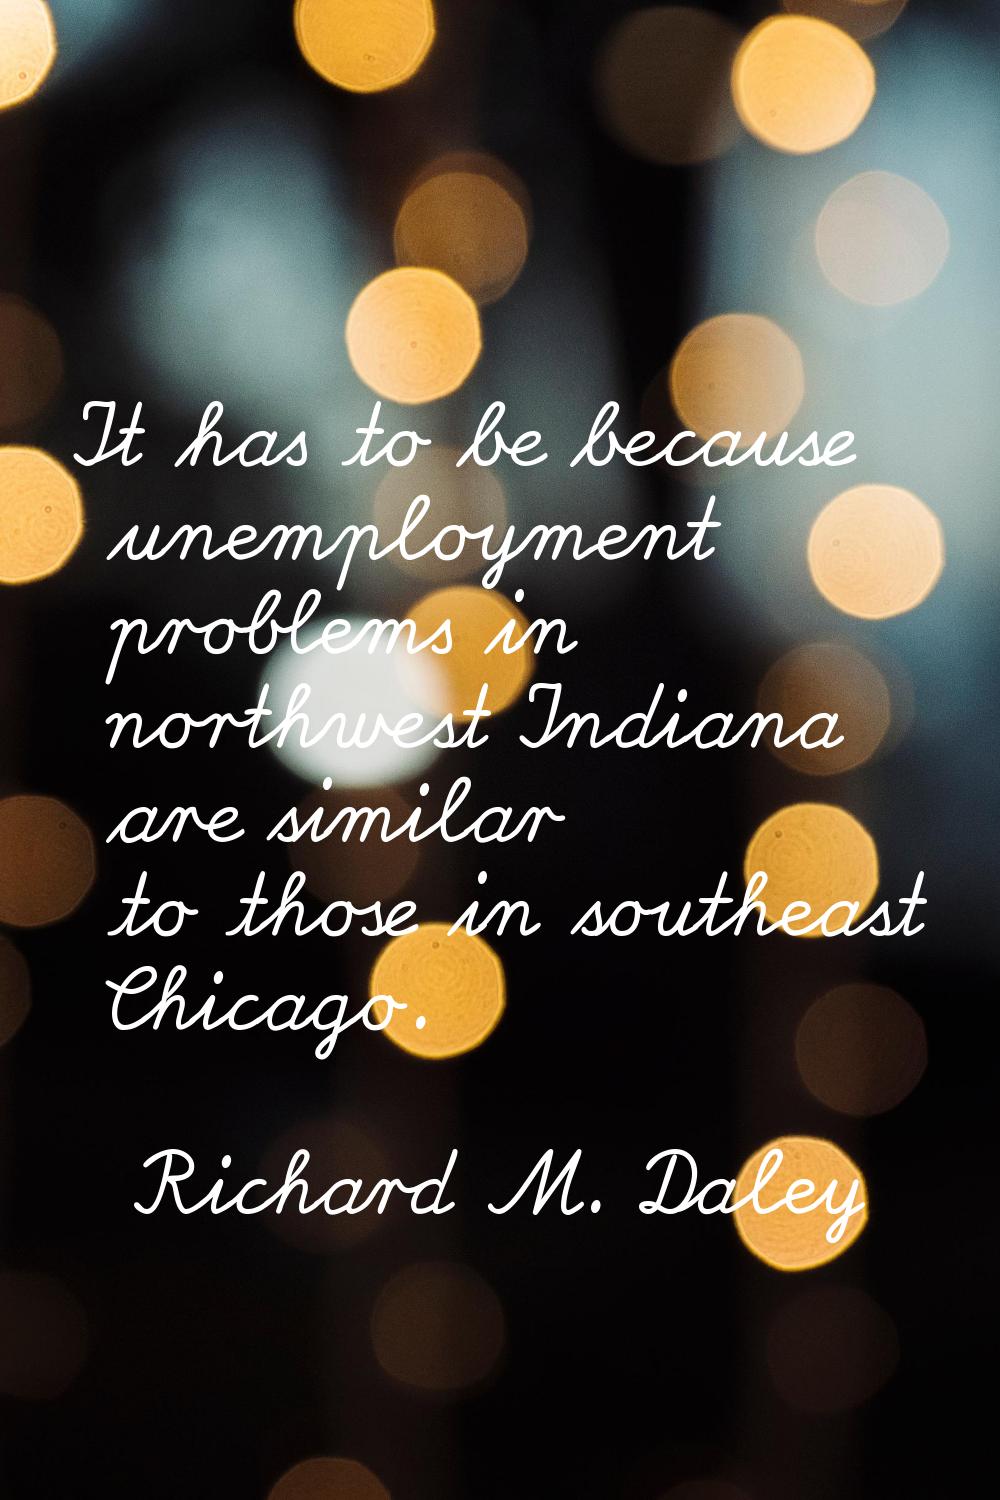 It has to be because unemployment problems in northwest Indiana are similar to those in southeast C